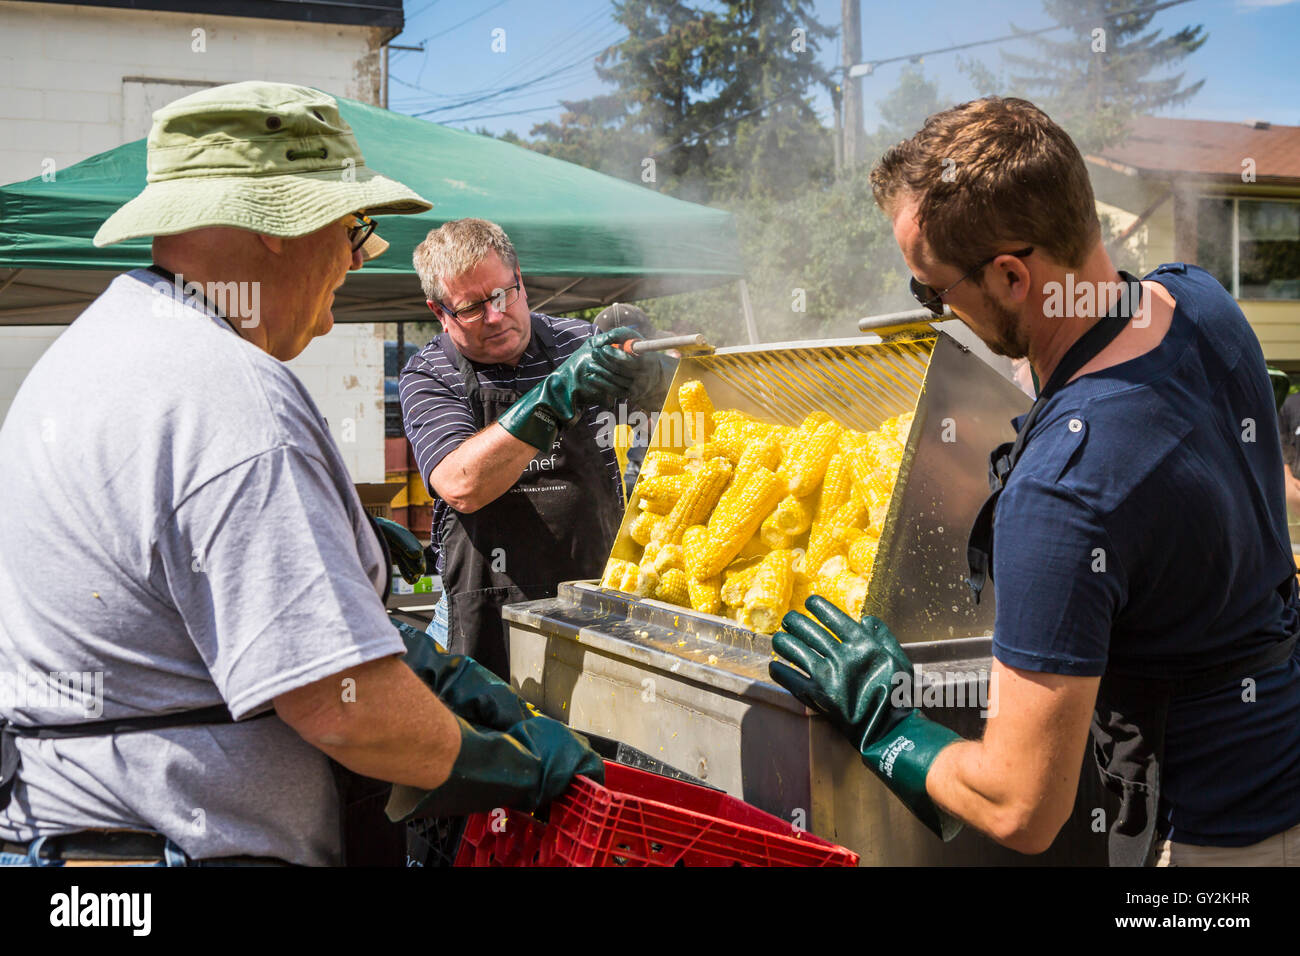 Boiling free corn on the cob at the Corn and Apple Festival in Morden, Manitoba, Canada. Stock Photo